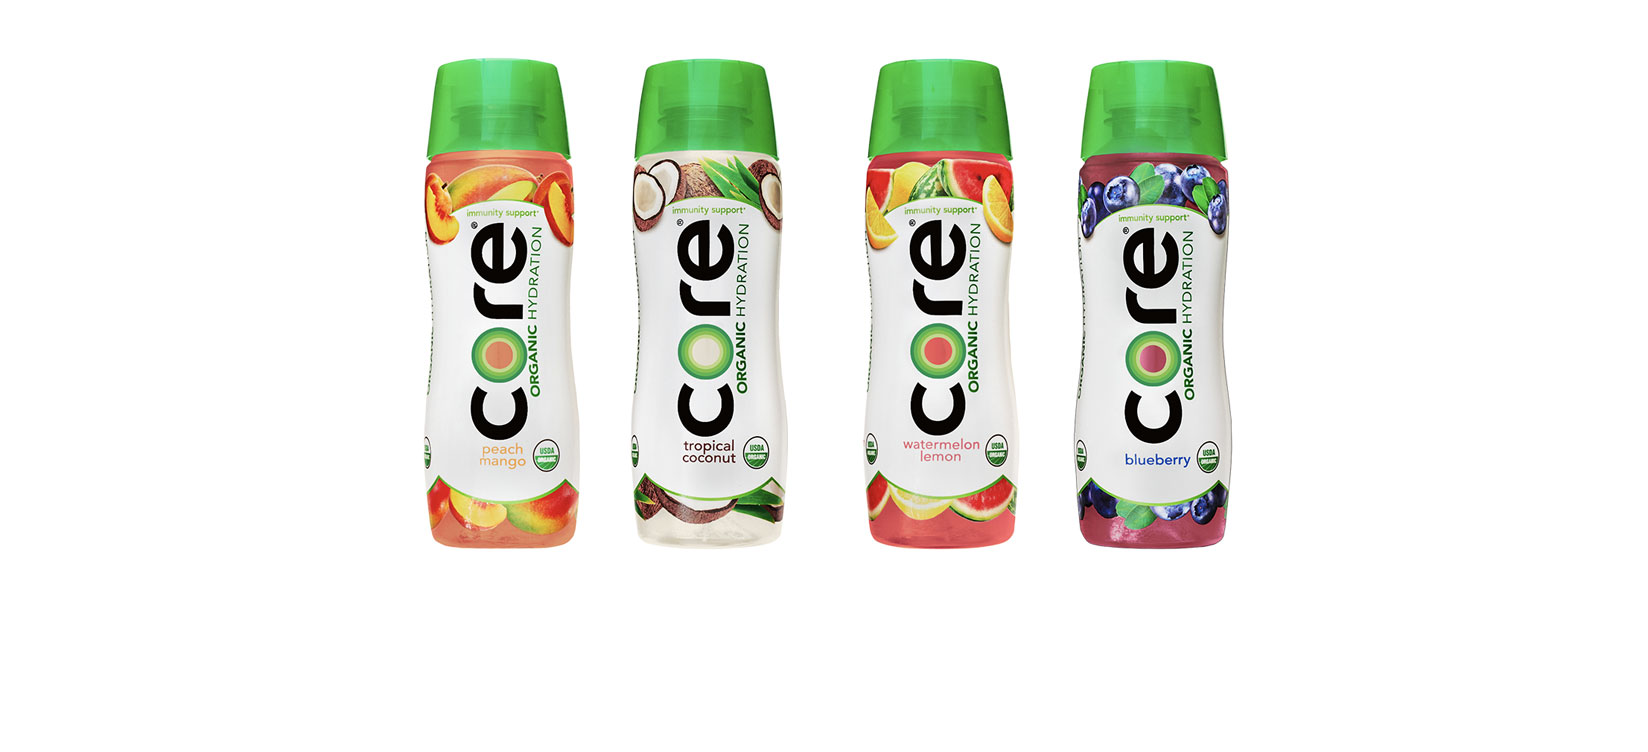 The flavors of CORE Organic Hydration